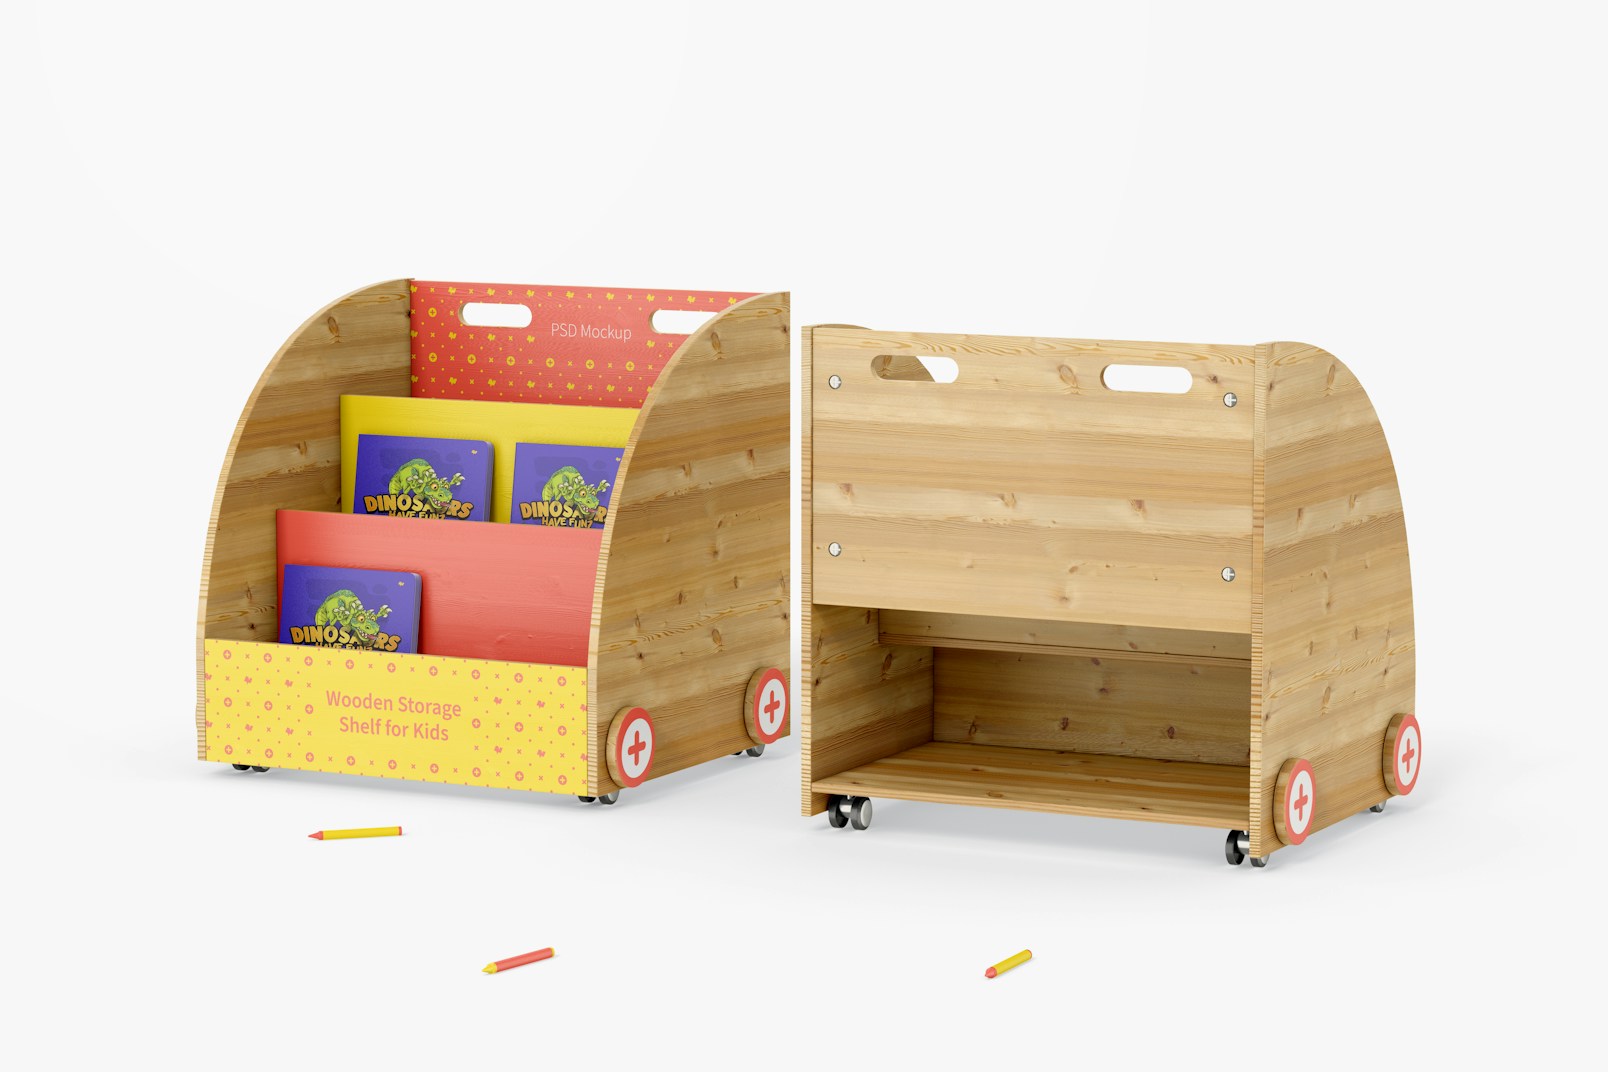 Wooden Storage Shelves for Kids Mockup, Front and Back View